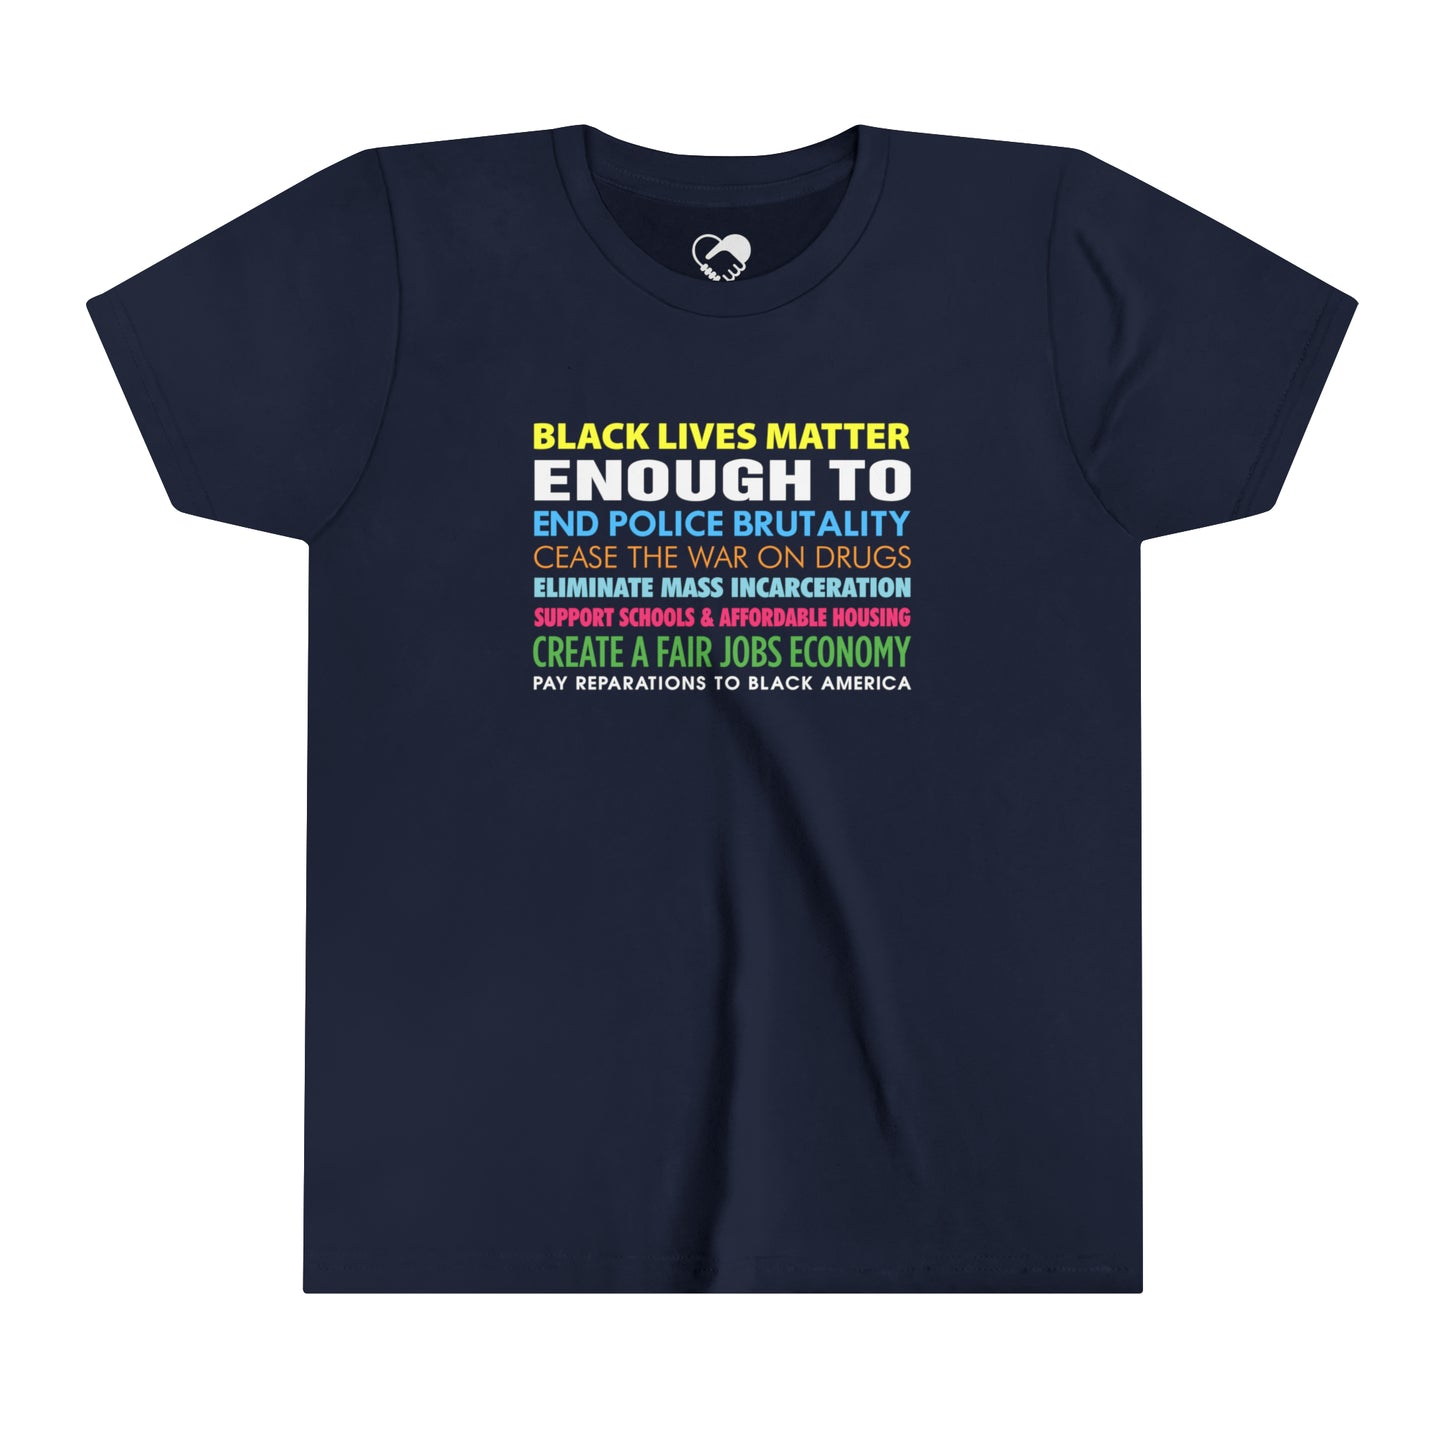 “Black Lives Matter Enough To” Youth T-Shirt